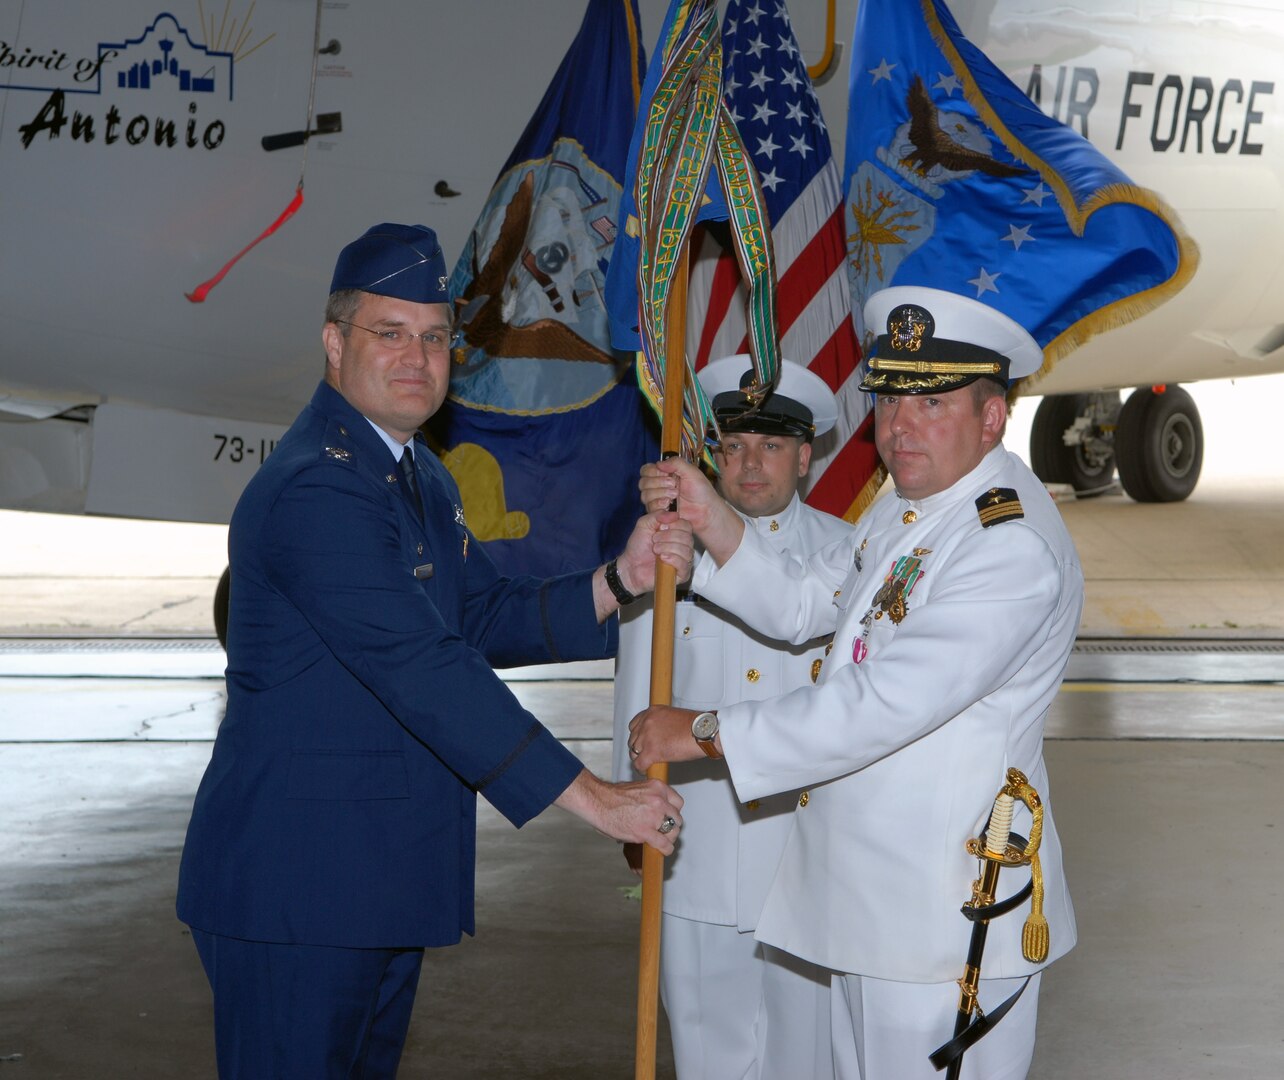 Col. Ronald Buckley (left), 12th Operations Group commander, assumes command of the 562nd Flying Training Squadron from Navy Cmdr. John Radka during a change of command ceremony Aug. 29. Commander Radka is the last U.S. Navy officer to command the 562nd. (U.S. Air Force photo by Don Lindsey)